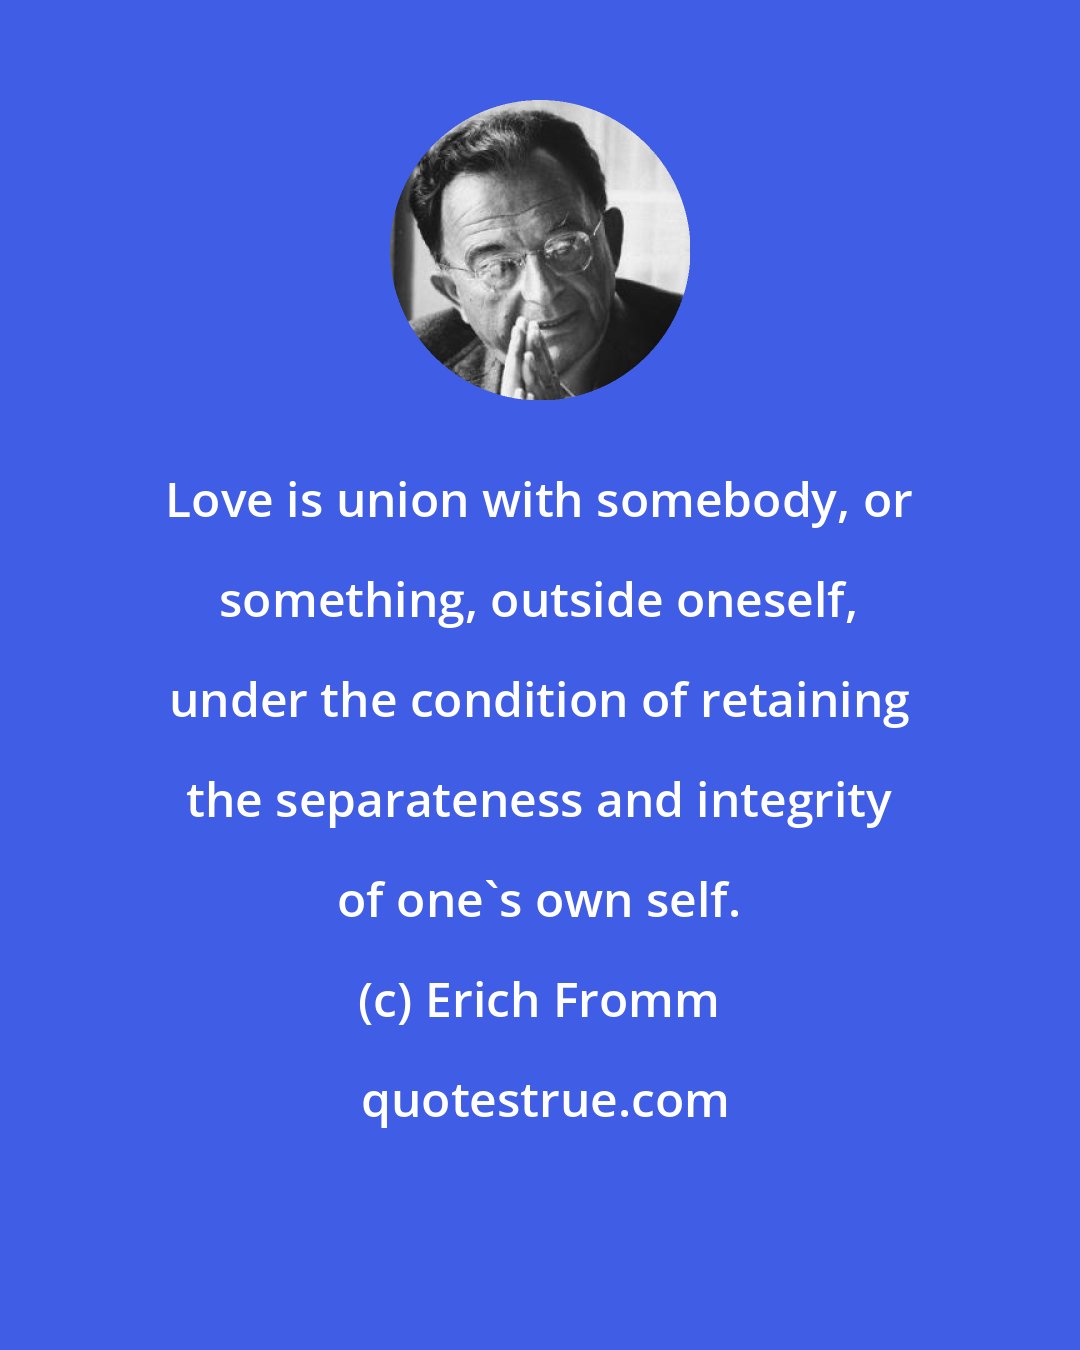 Erich Fromm: Love is union with somebody, or something, outside oneself, under the condition of retaining the separateness and integrity of one's own self.